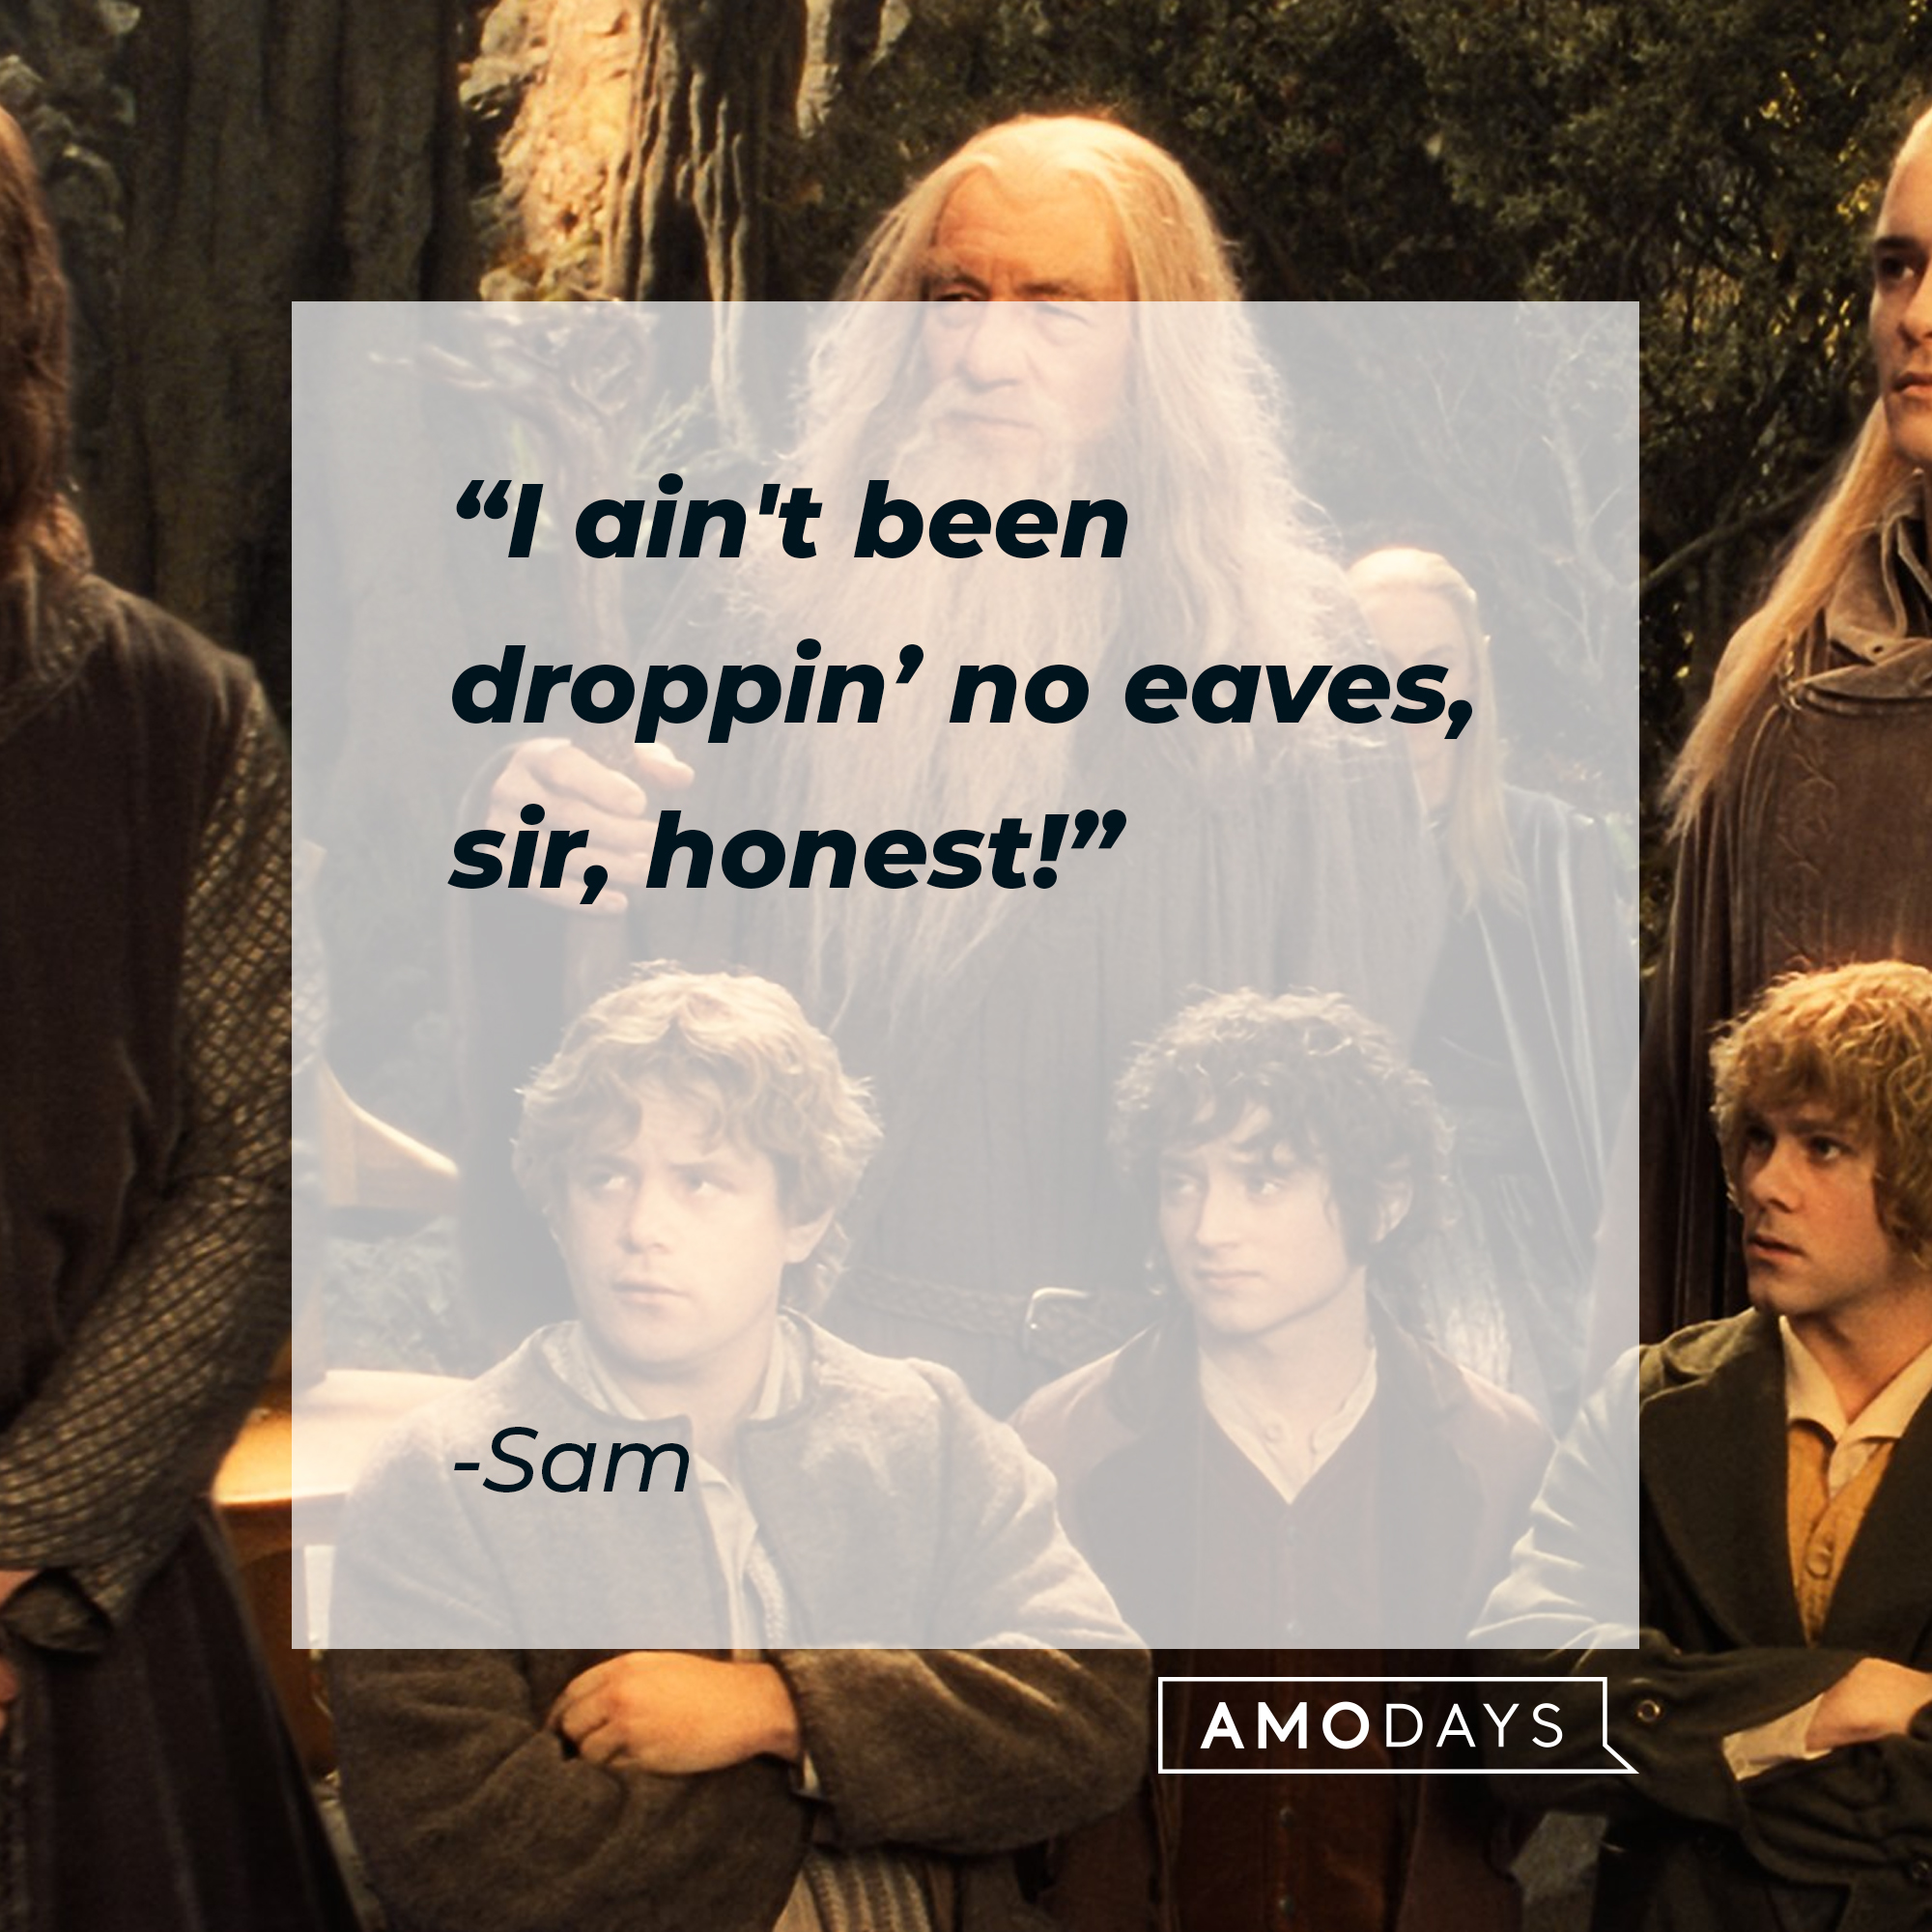 Sam's quote: "I ain't been droppin' no eaves, sir, honest!" | Source: facebook.com/lordoftheringstrilogy